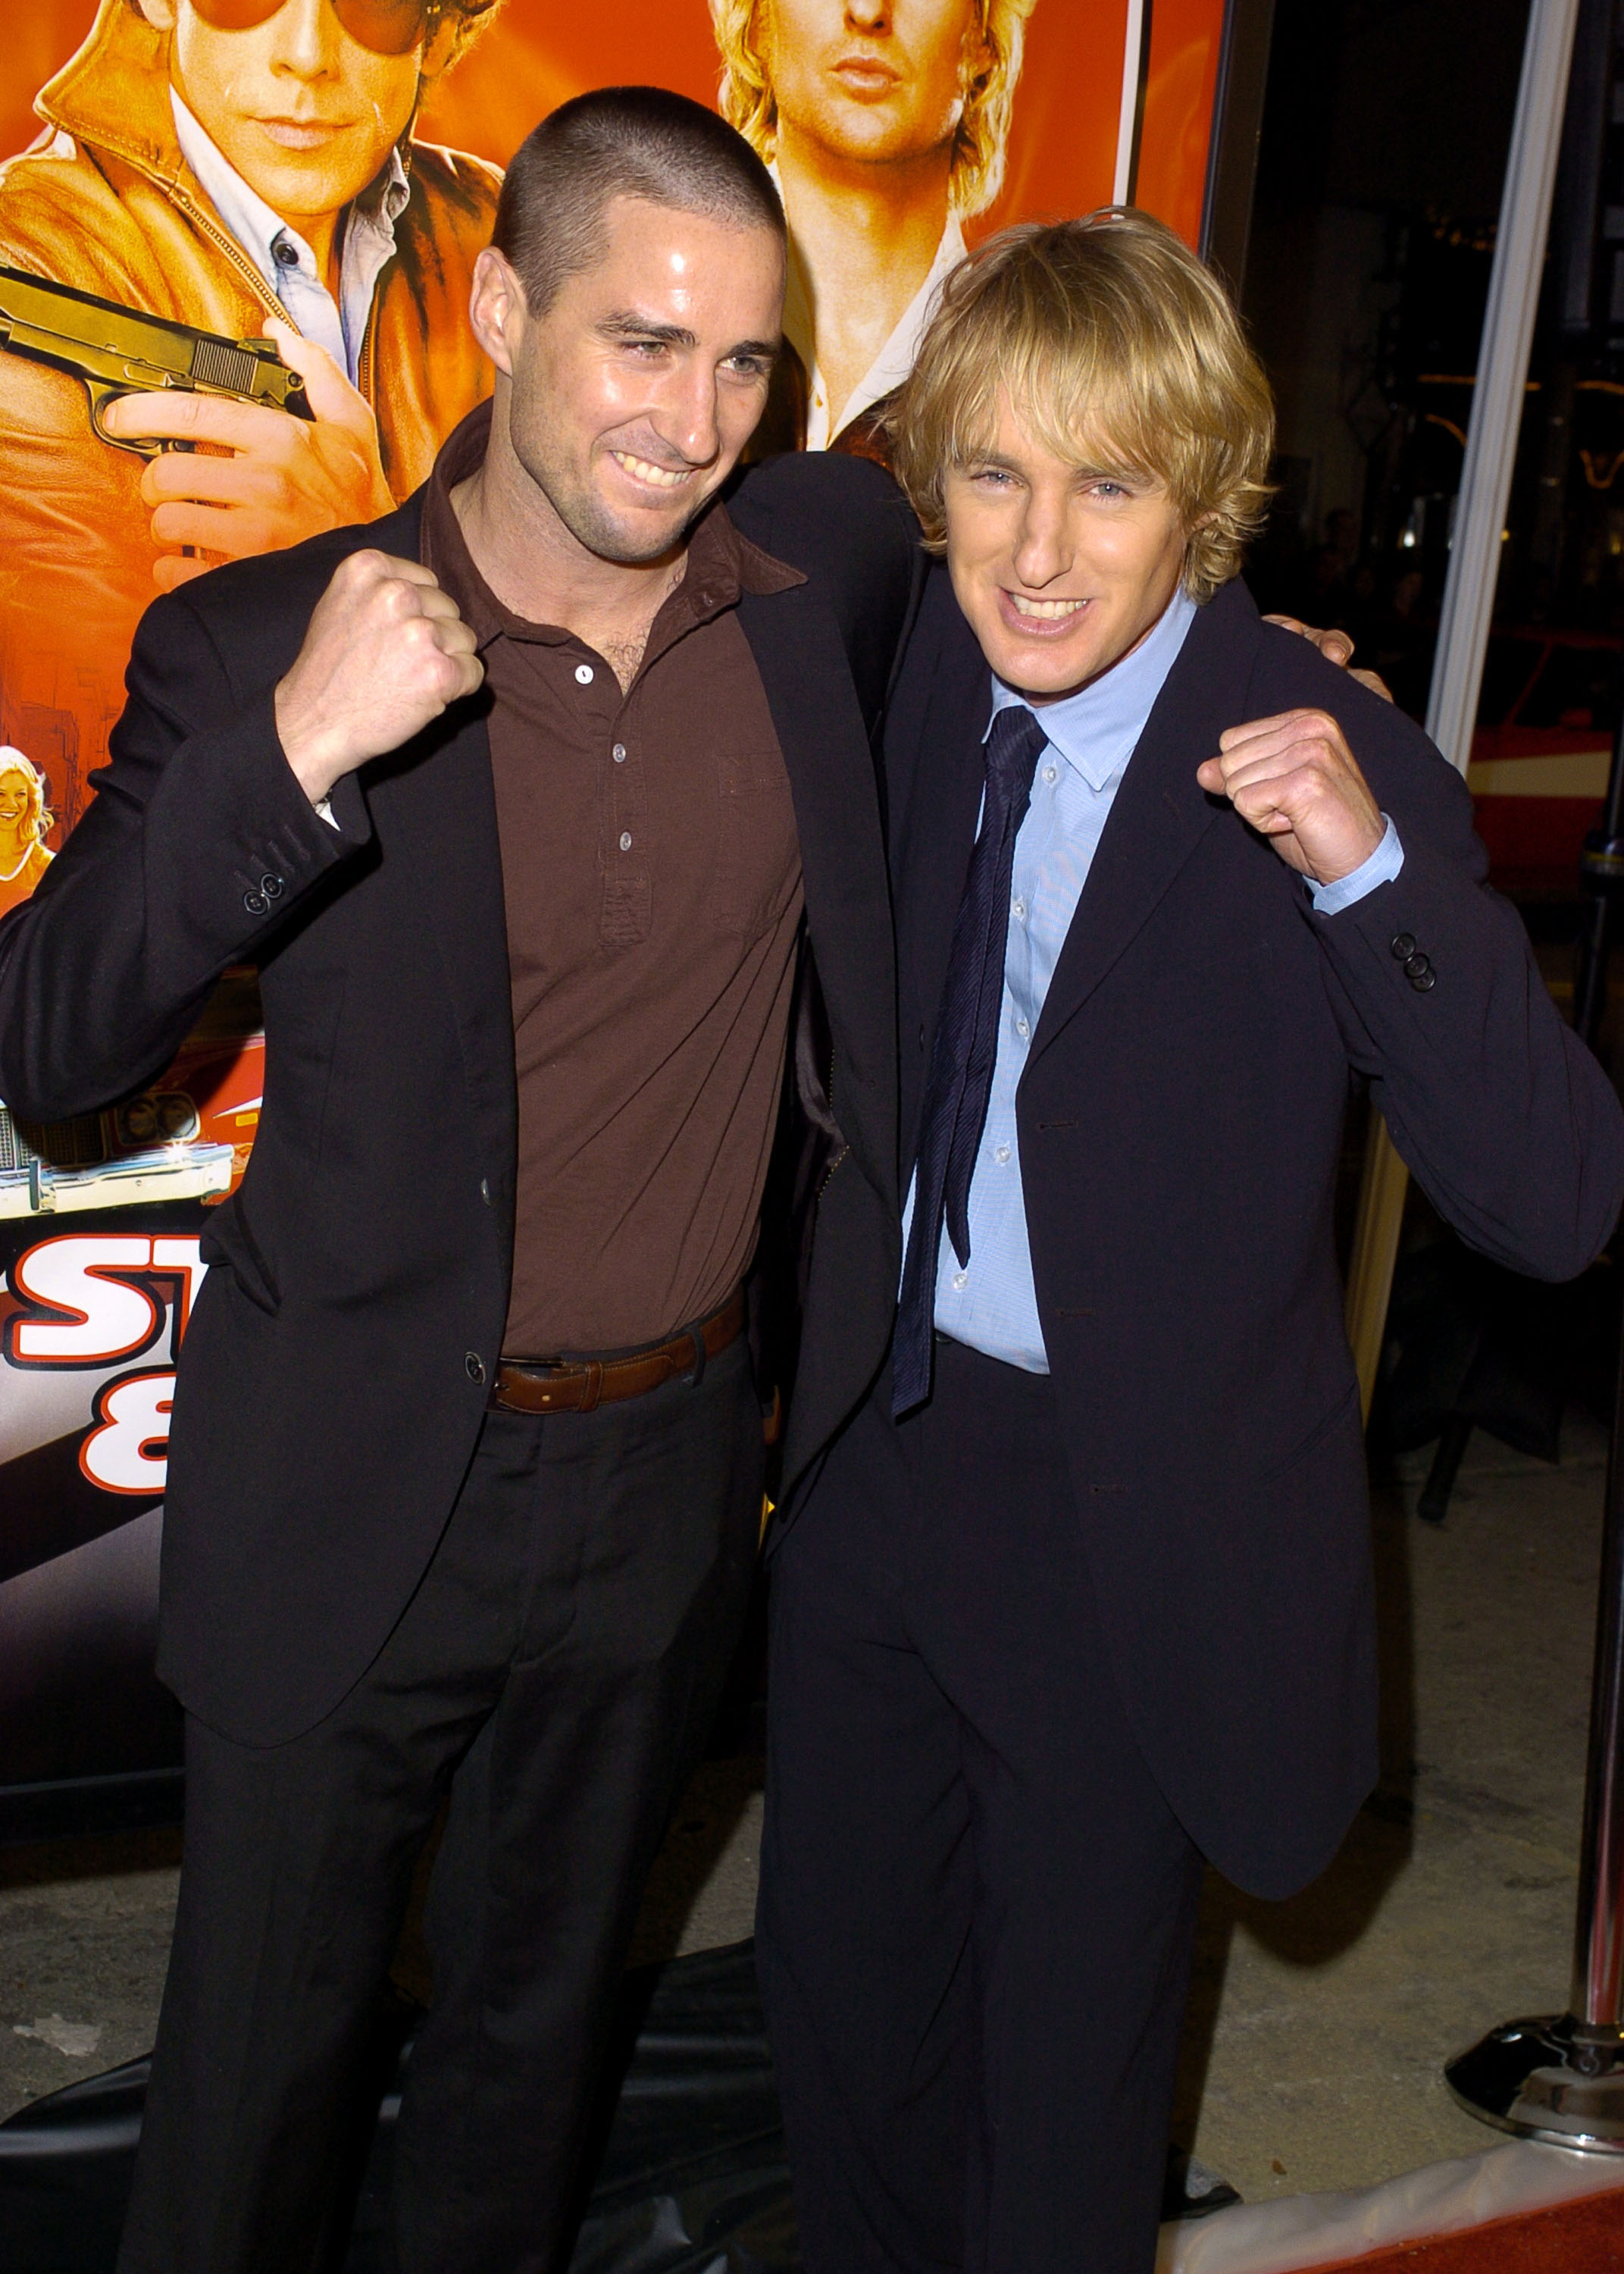 Luke and Owen Wilson during World Premiere of "Starsky & Hutch" - Arrivals in Westwood, on Februay 26, 2004. | Source: Getty Images